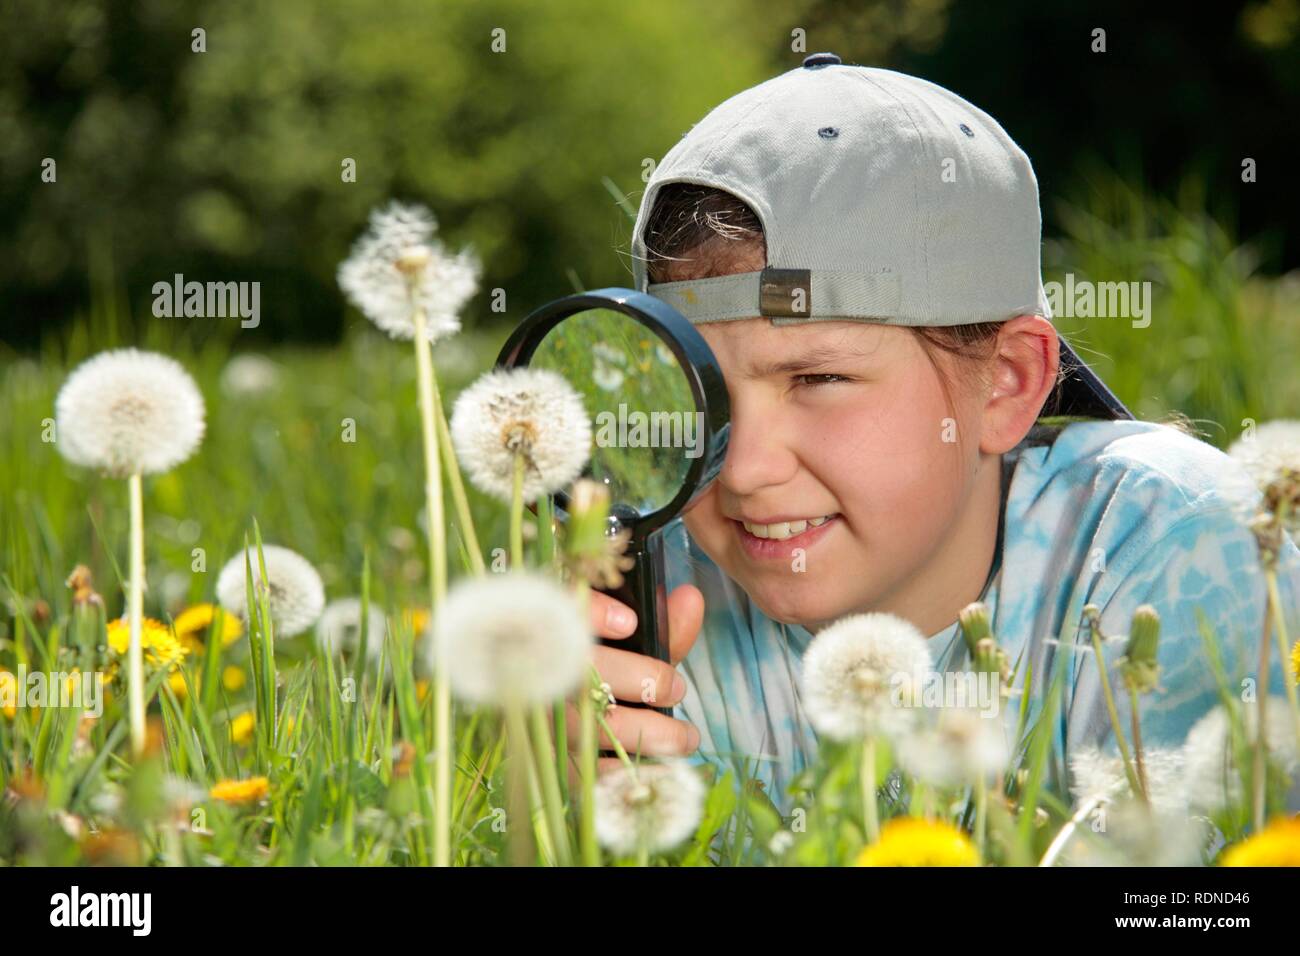 Girls looking at dandelions through a magnifying glass Stock Photo